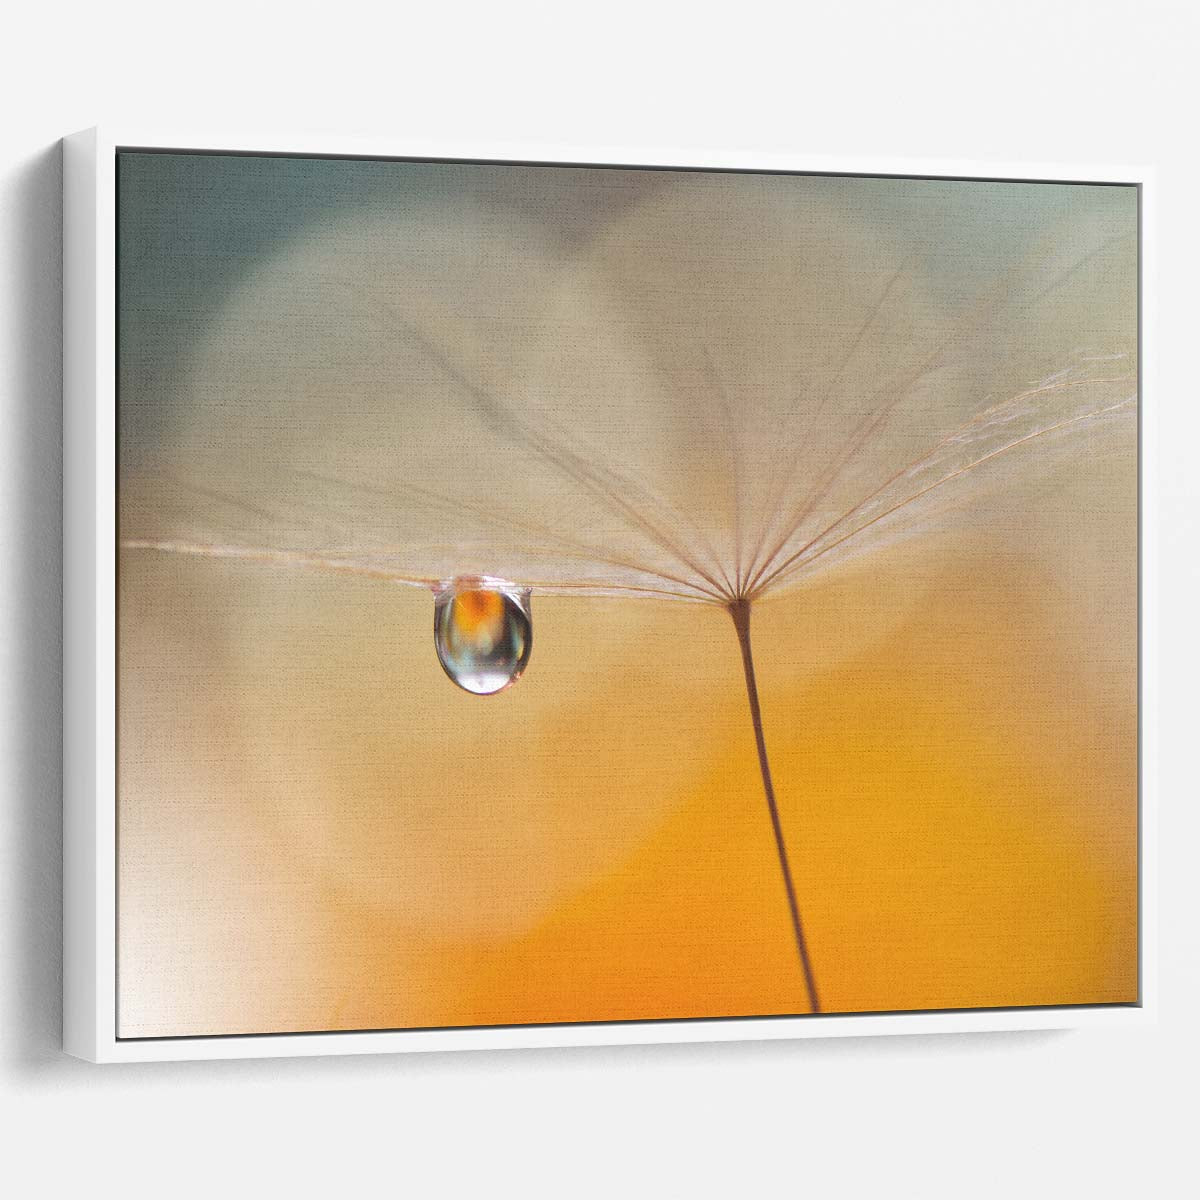 Abstract Macro Dandelion & Feather Drops Wall Art by Luxuriance Designs. Made in USA.